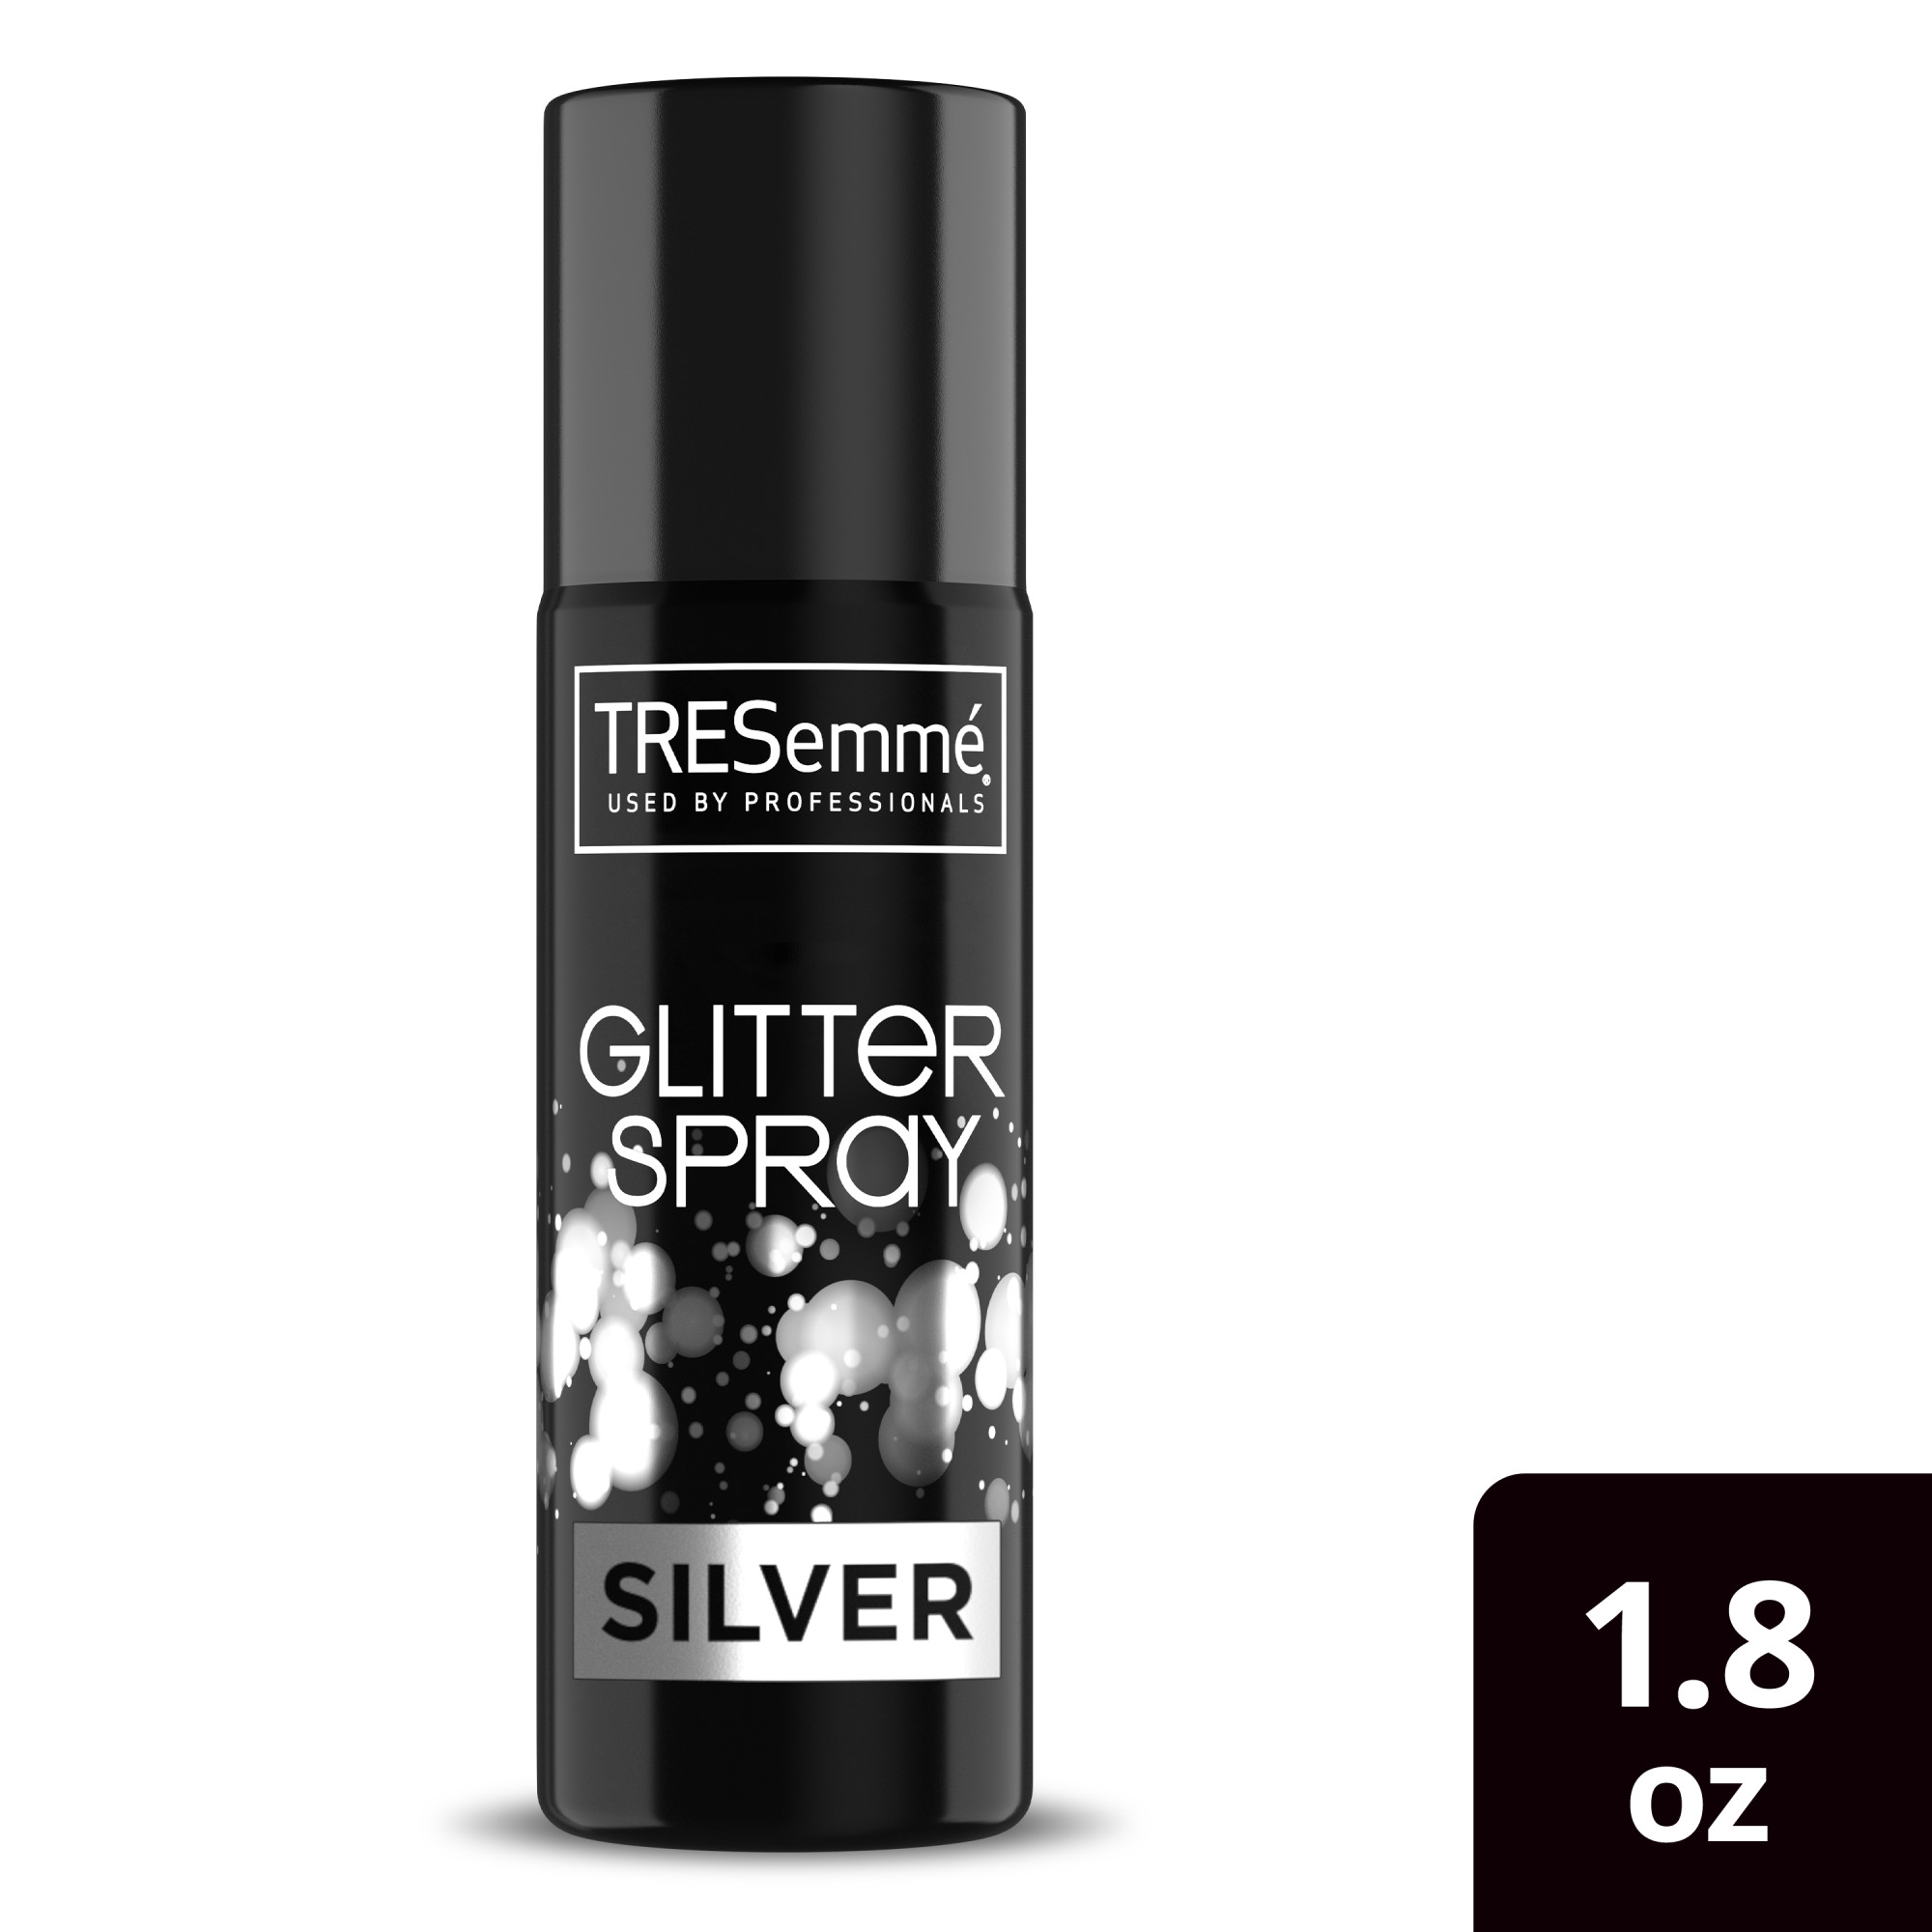 Tresemme Colored Hair Spray Silver 1.8 oz - image 1 of 4